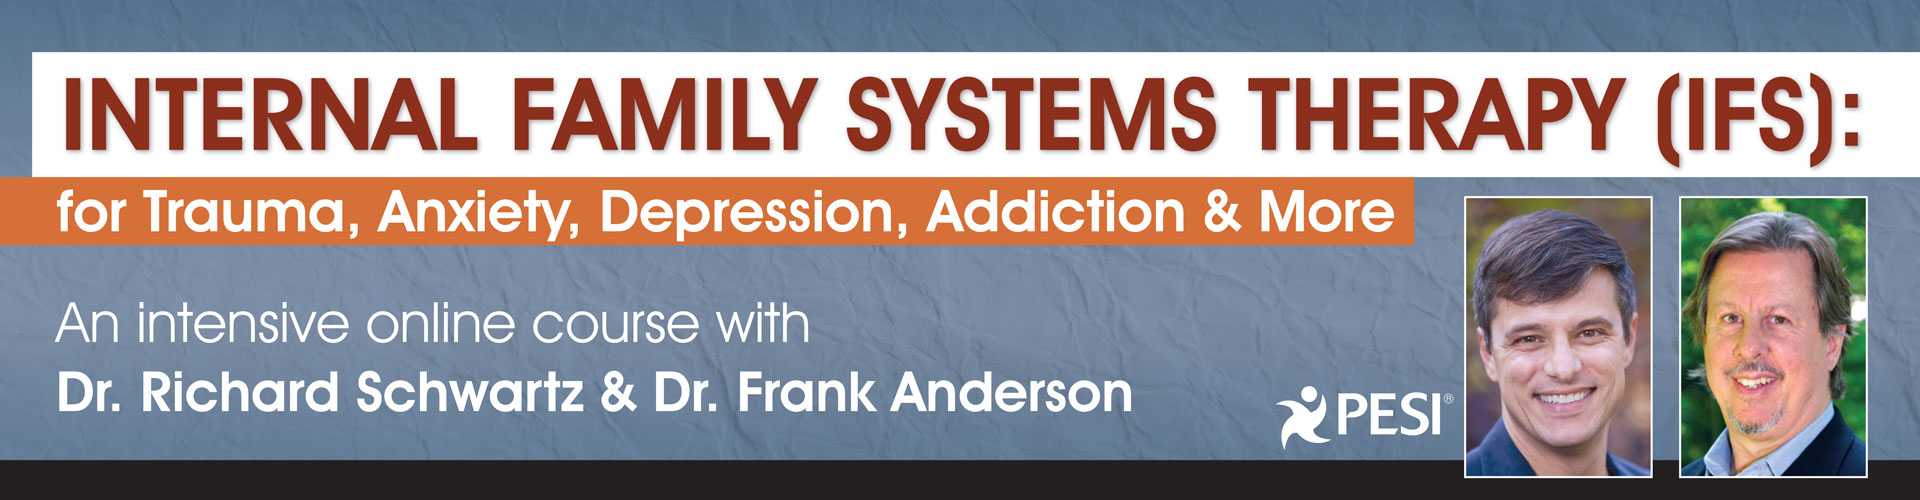 Internal Family Systems (IFS) for Trauma, Anxiety, Depression, Addiction & More